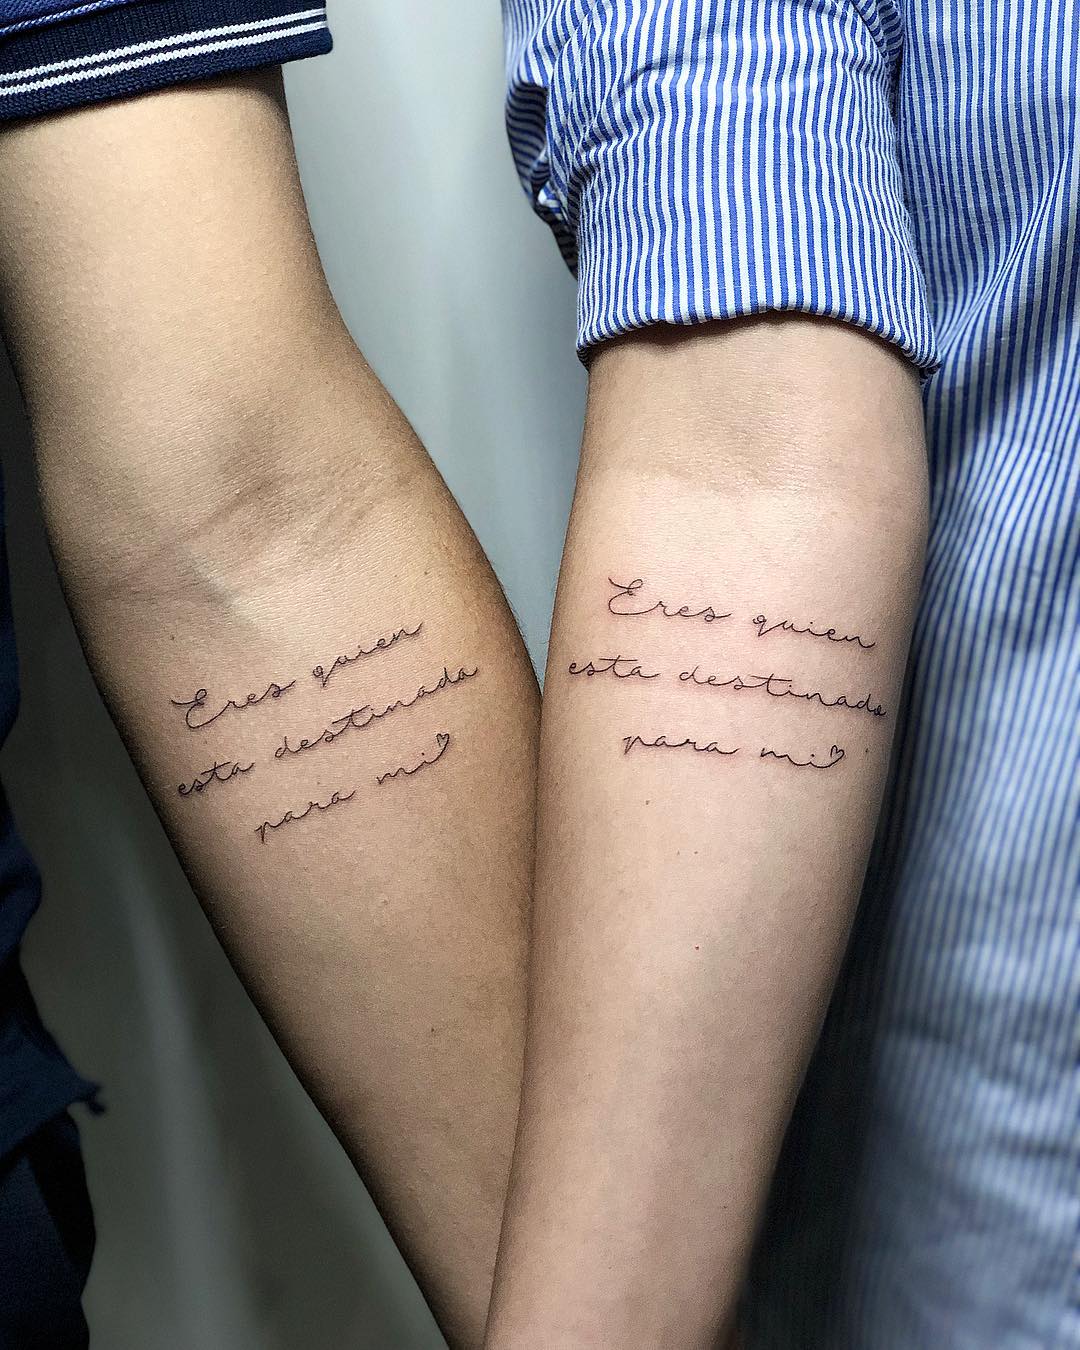 Couple goals tattoo by @soychapa